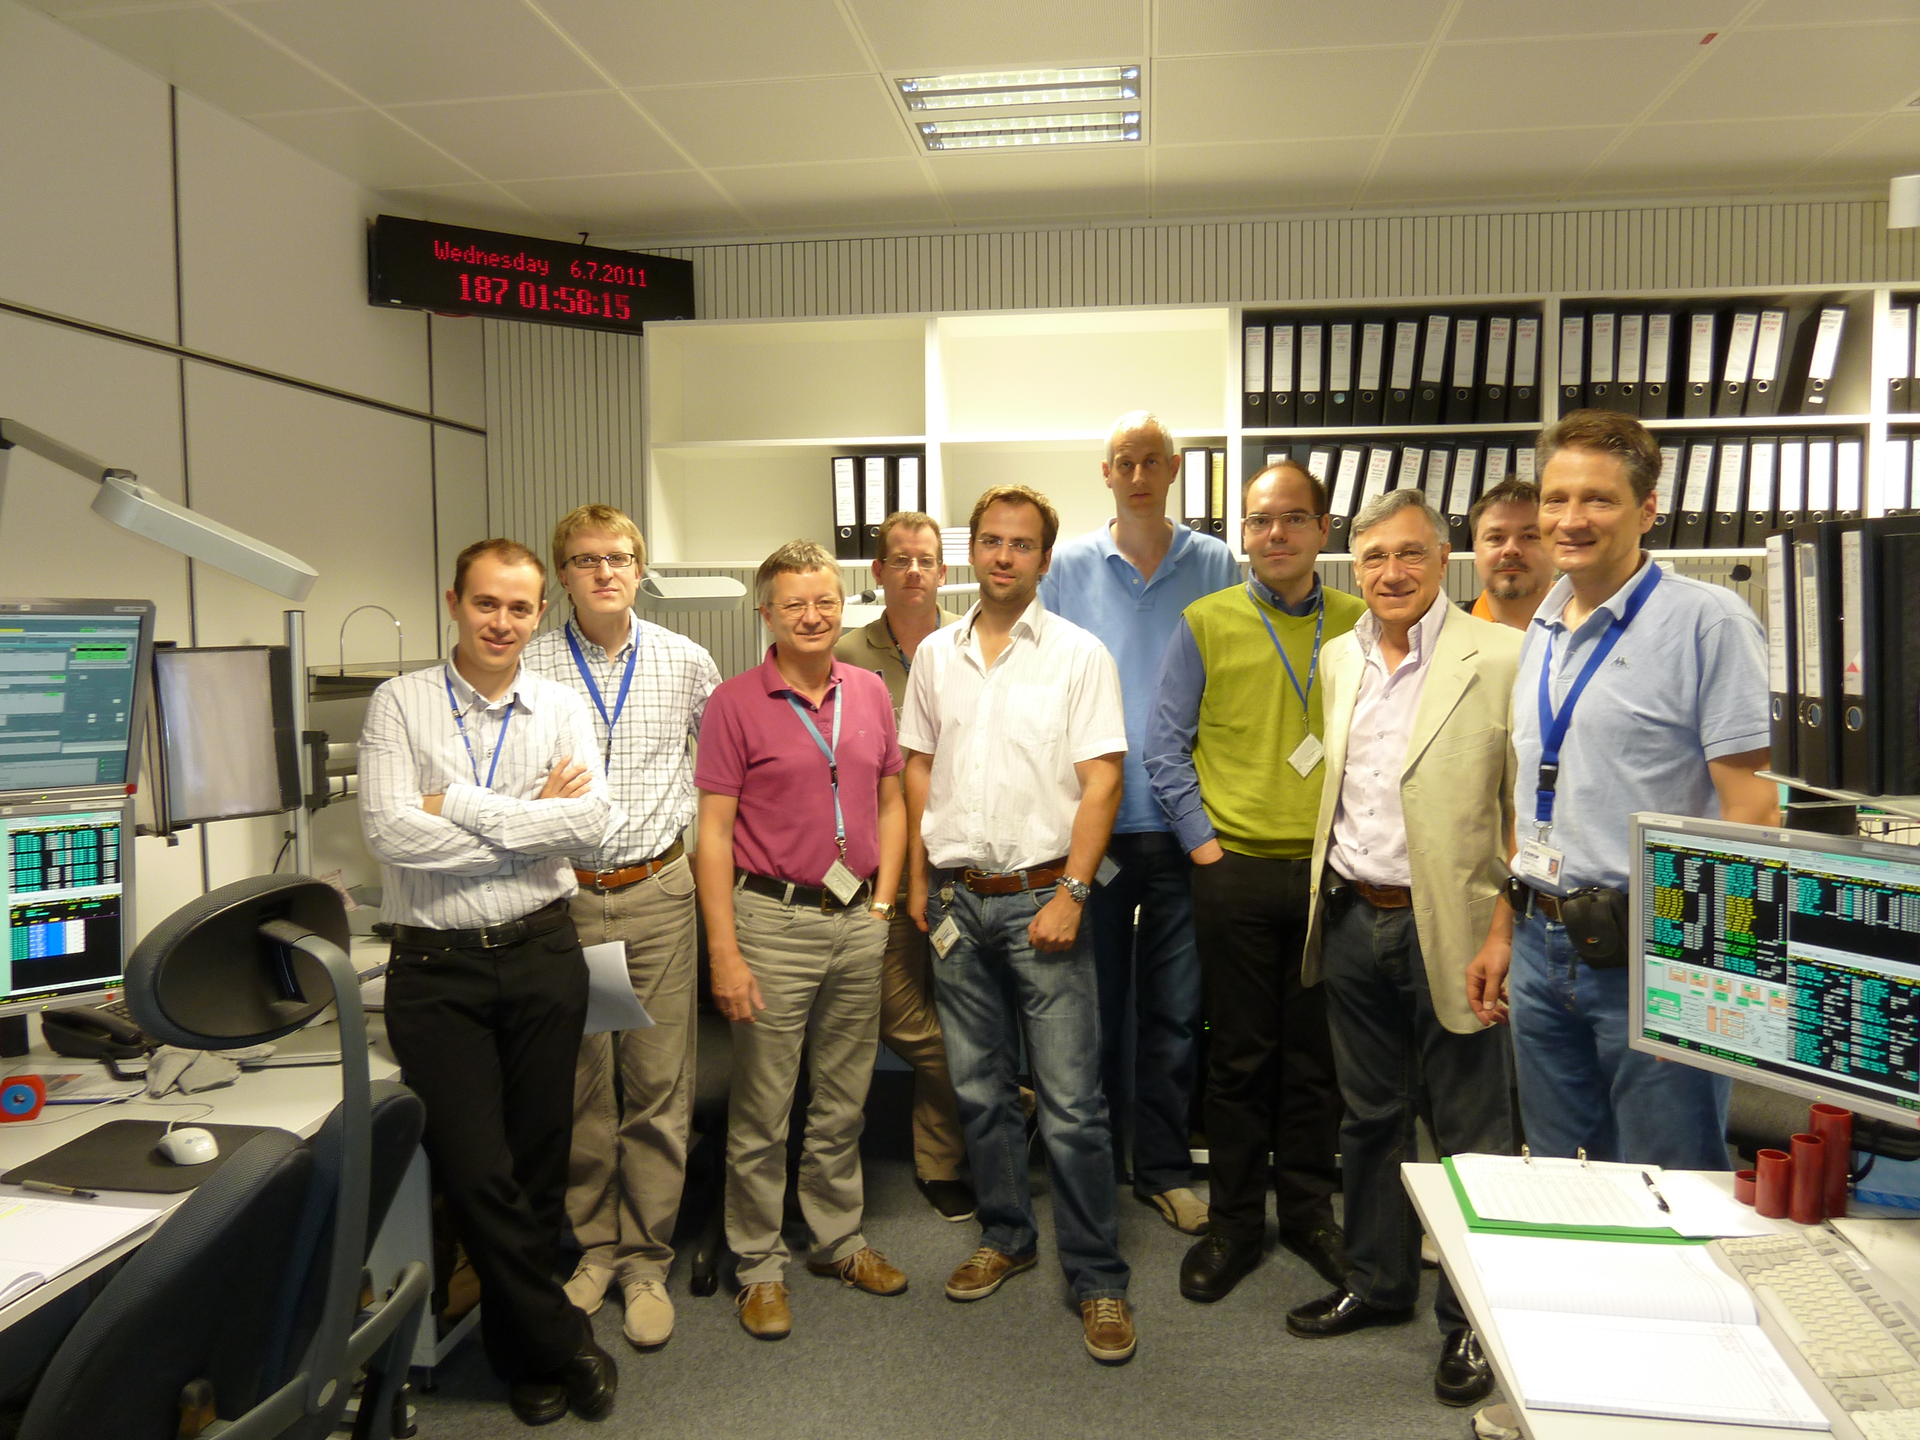 Part of the ESA team at ESOC for deorbiting